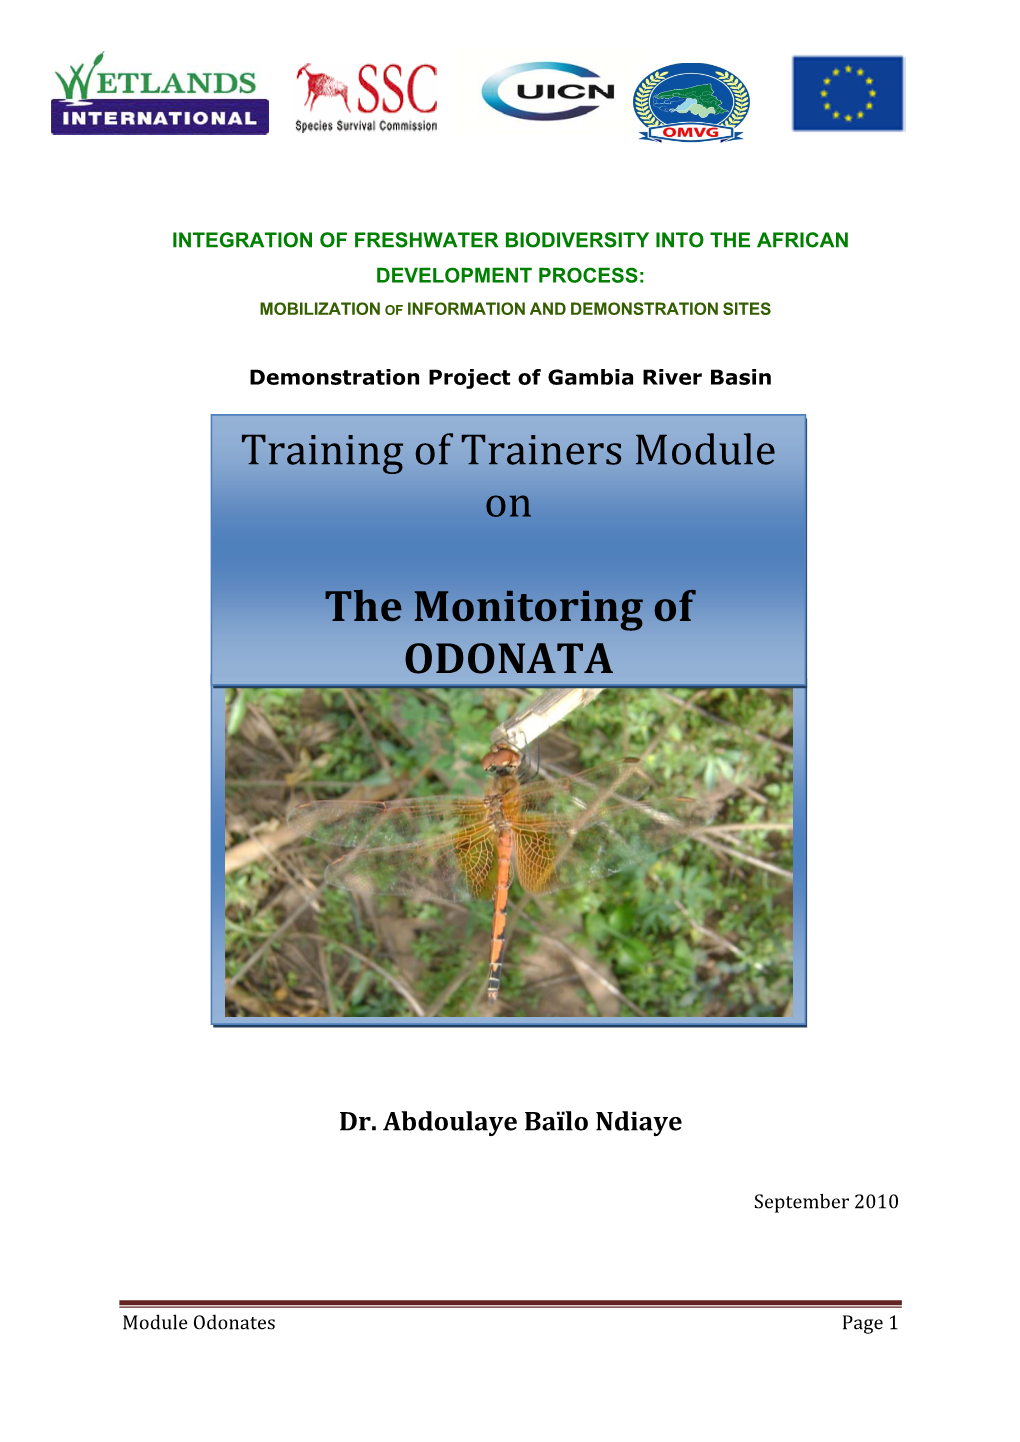 Training of Trainers Module on the Monitoring of ODONATA